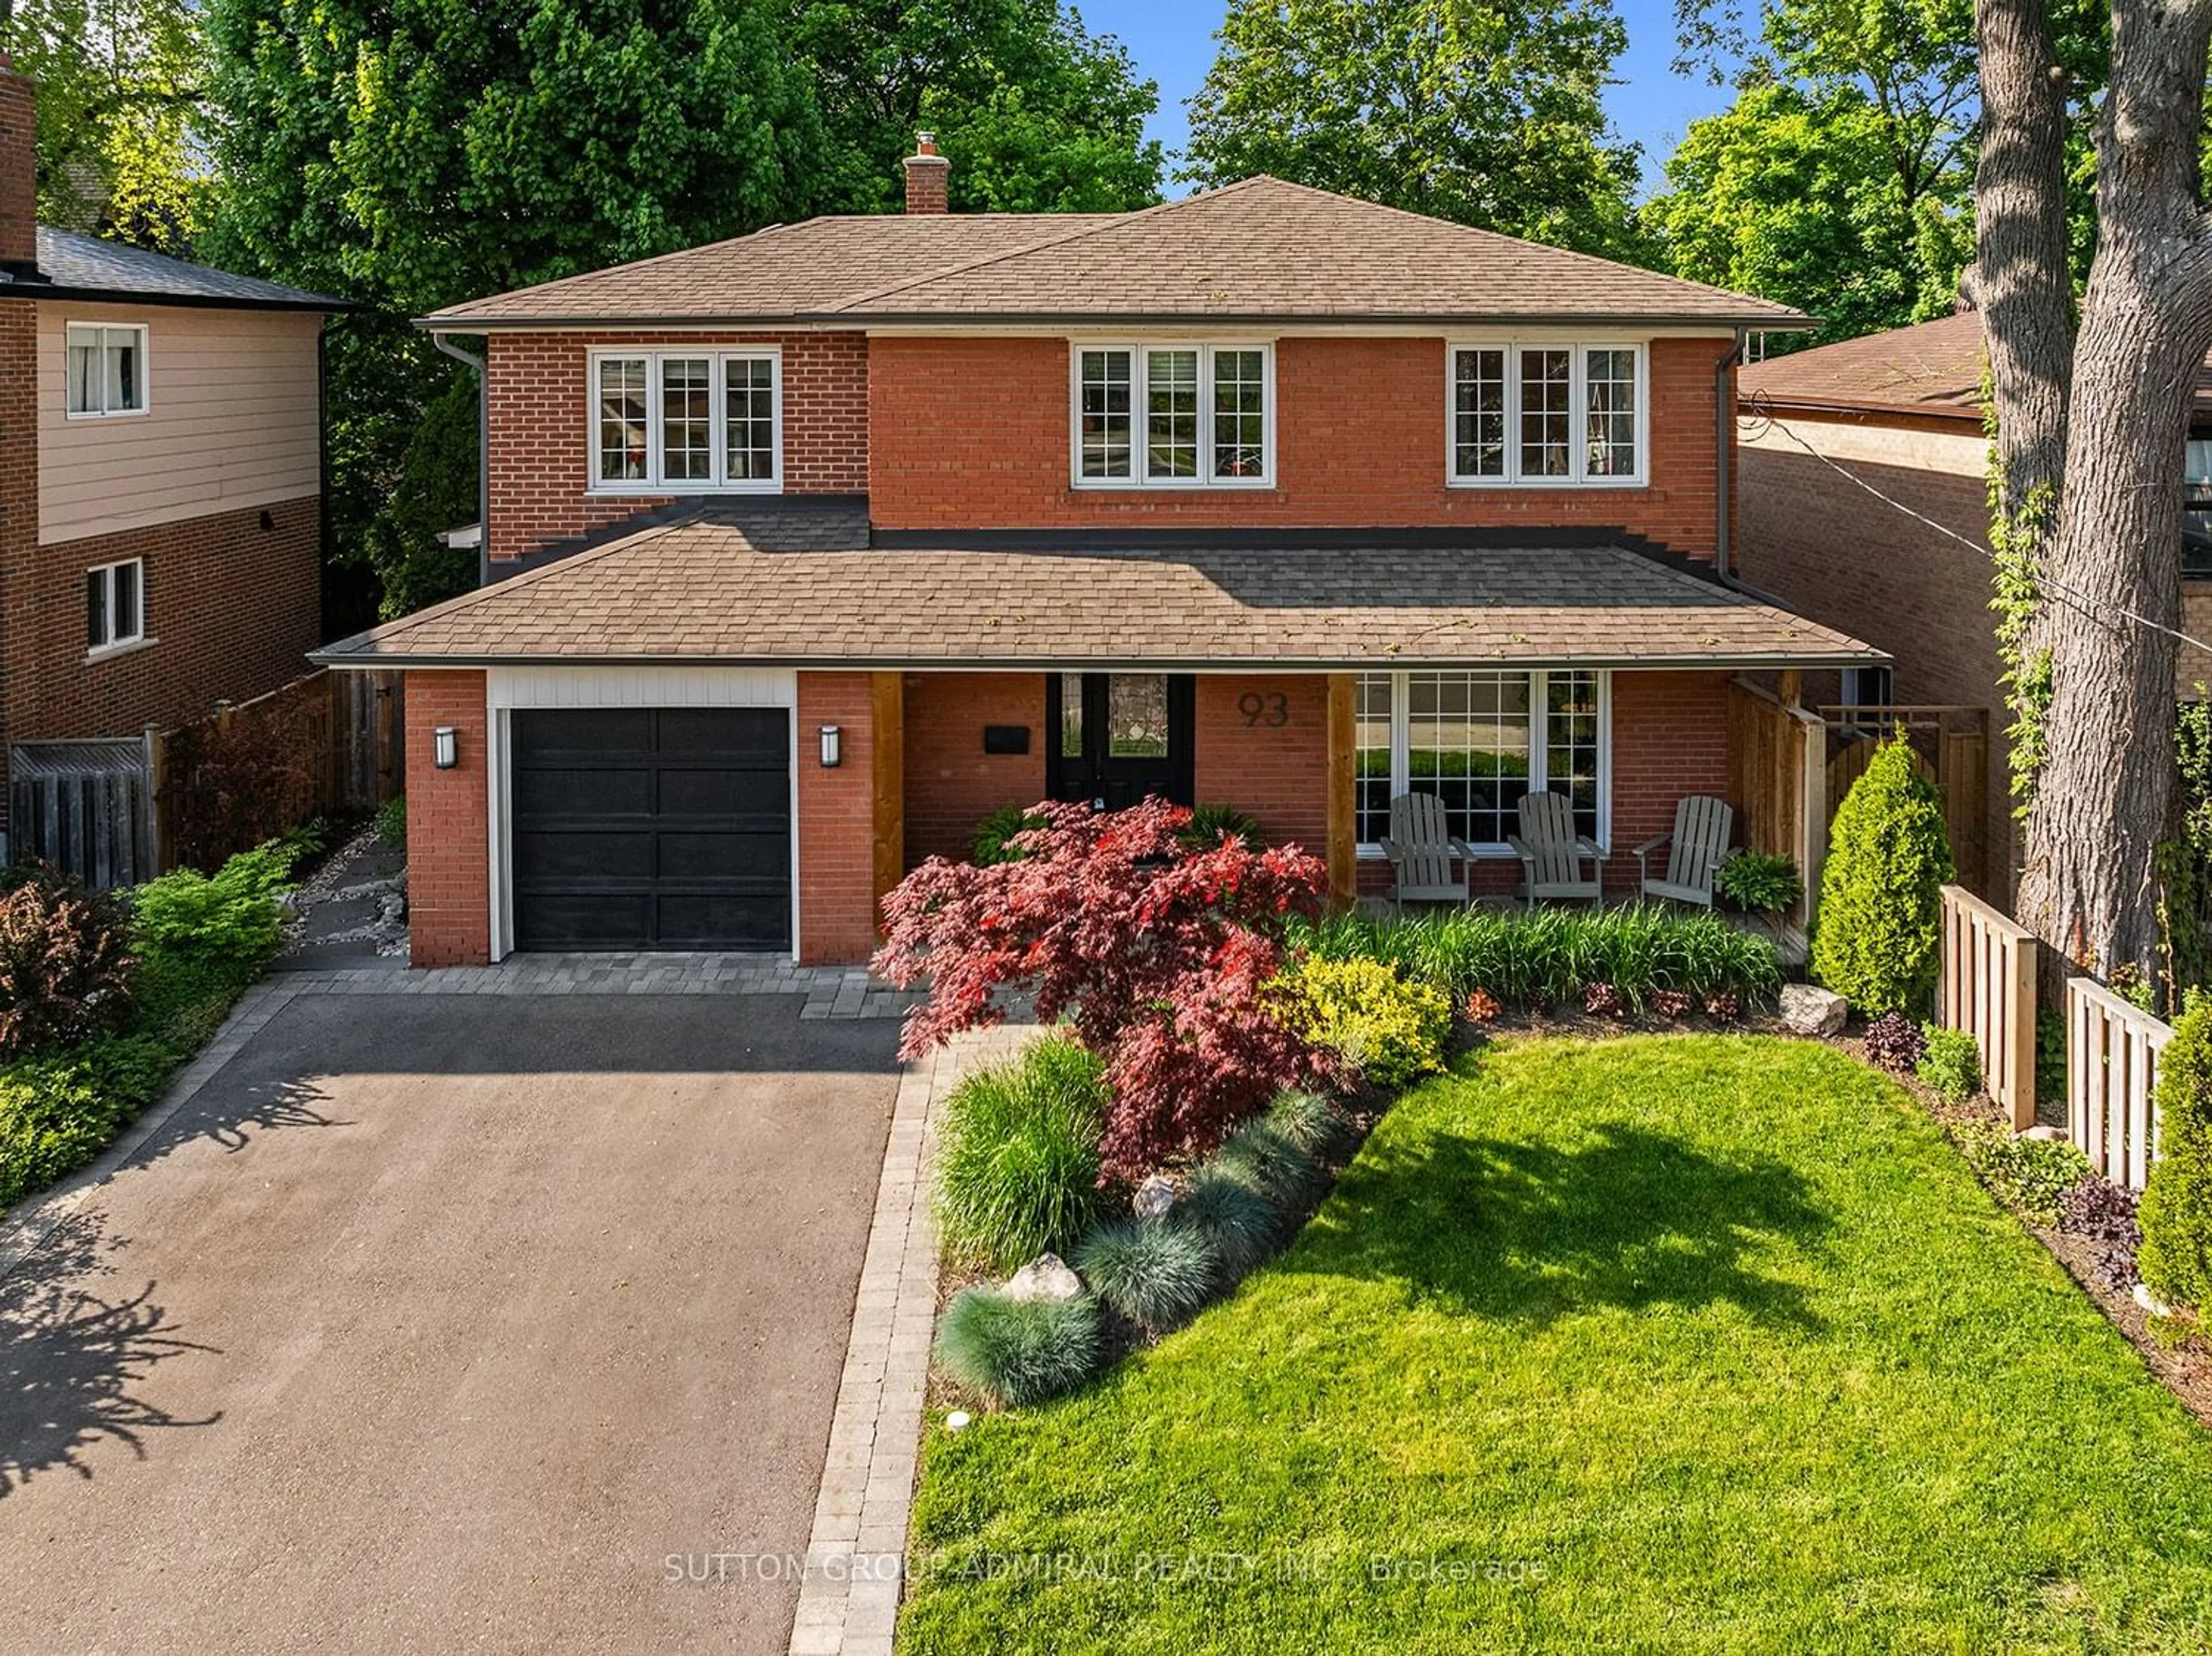 Home with brick exterior material for 93 Wright St, Richmond Hill Ontario L4C 4A3